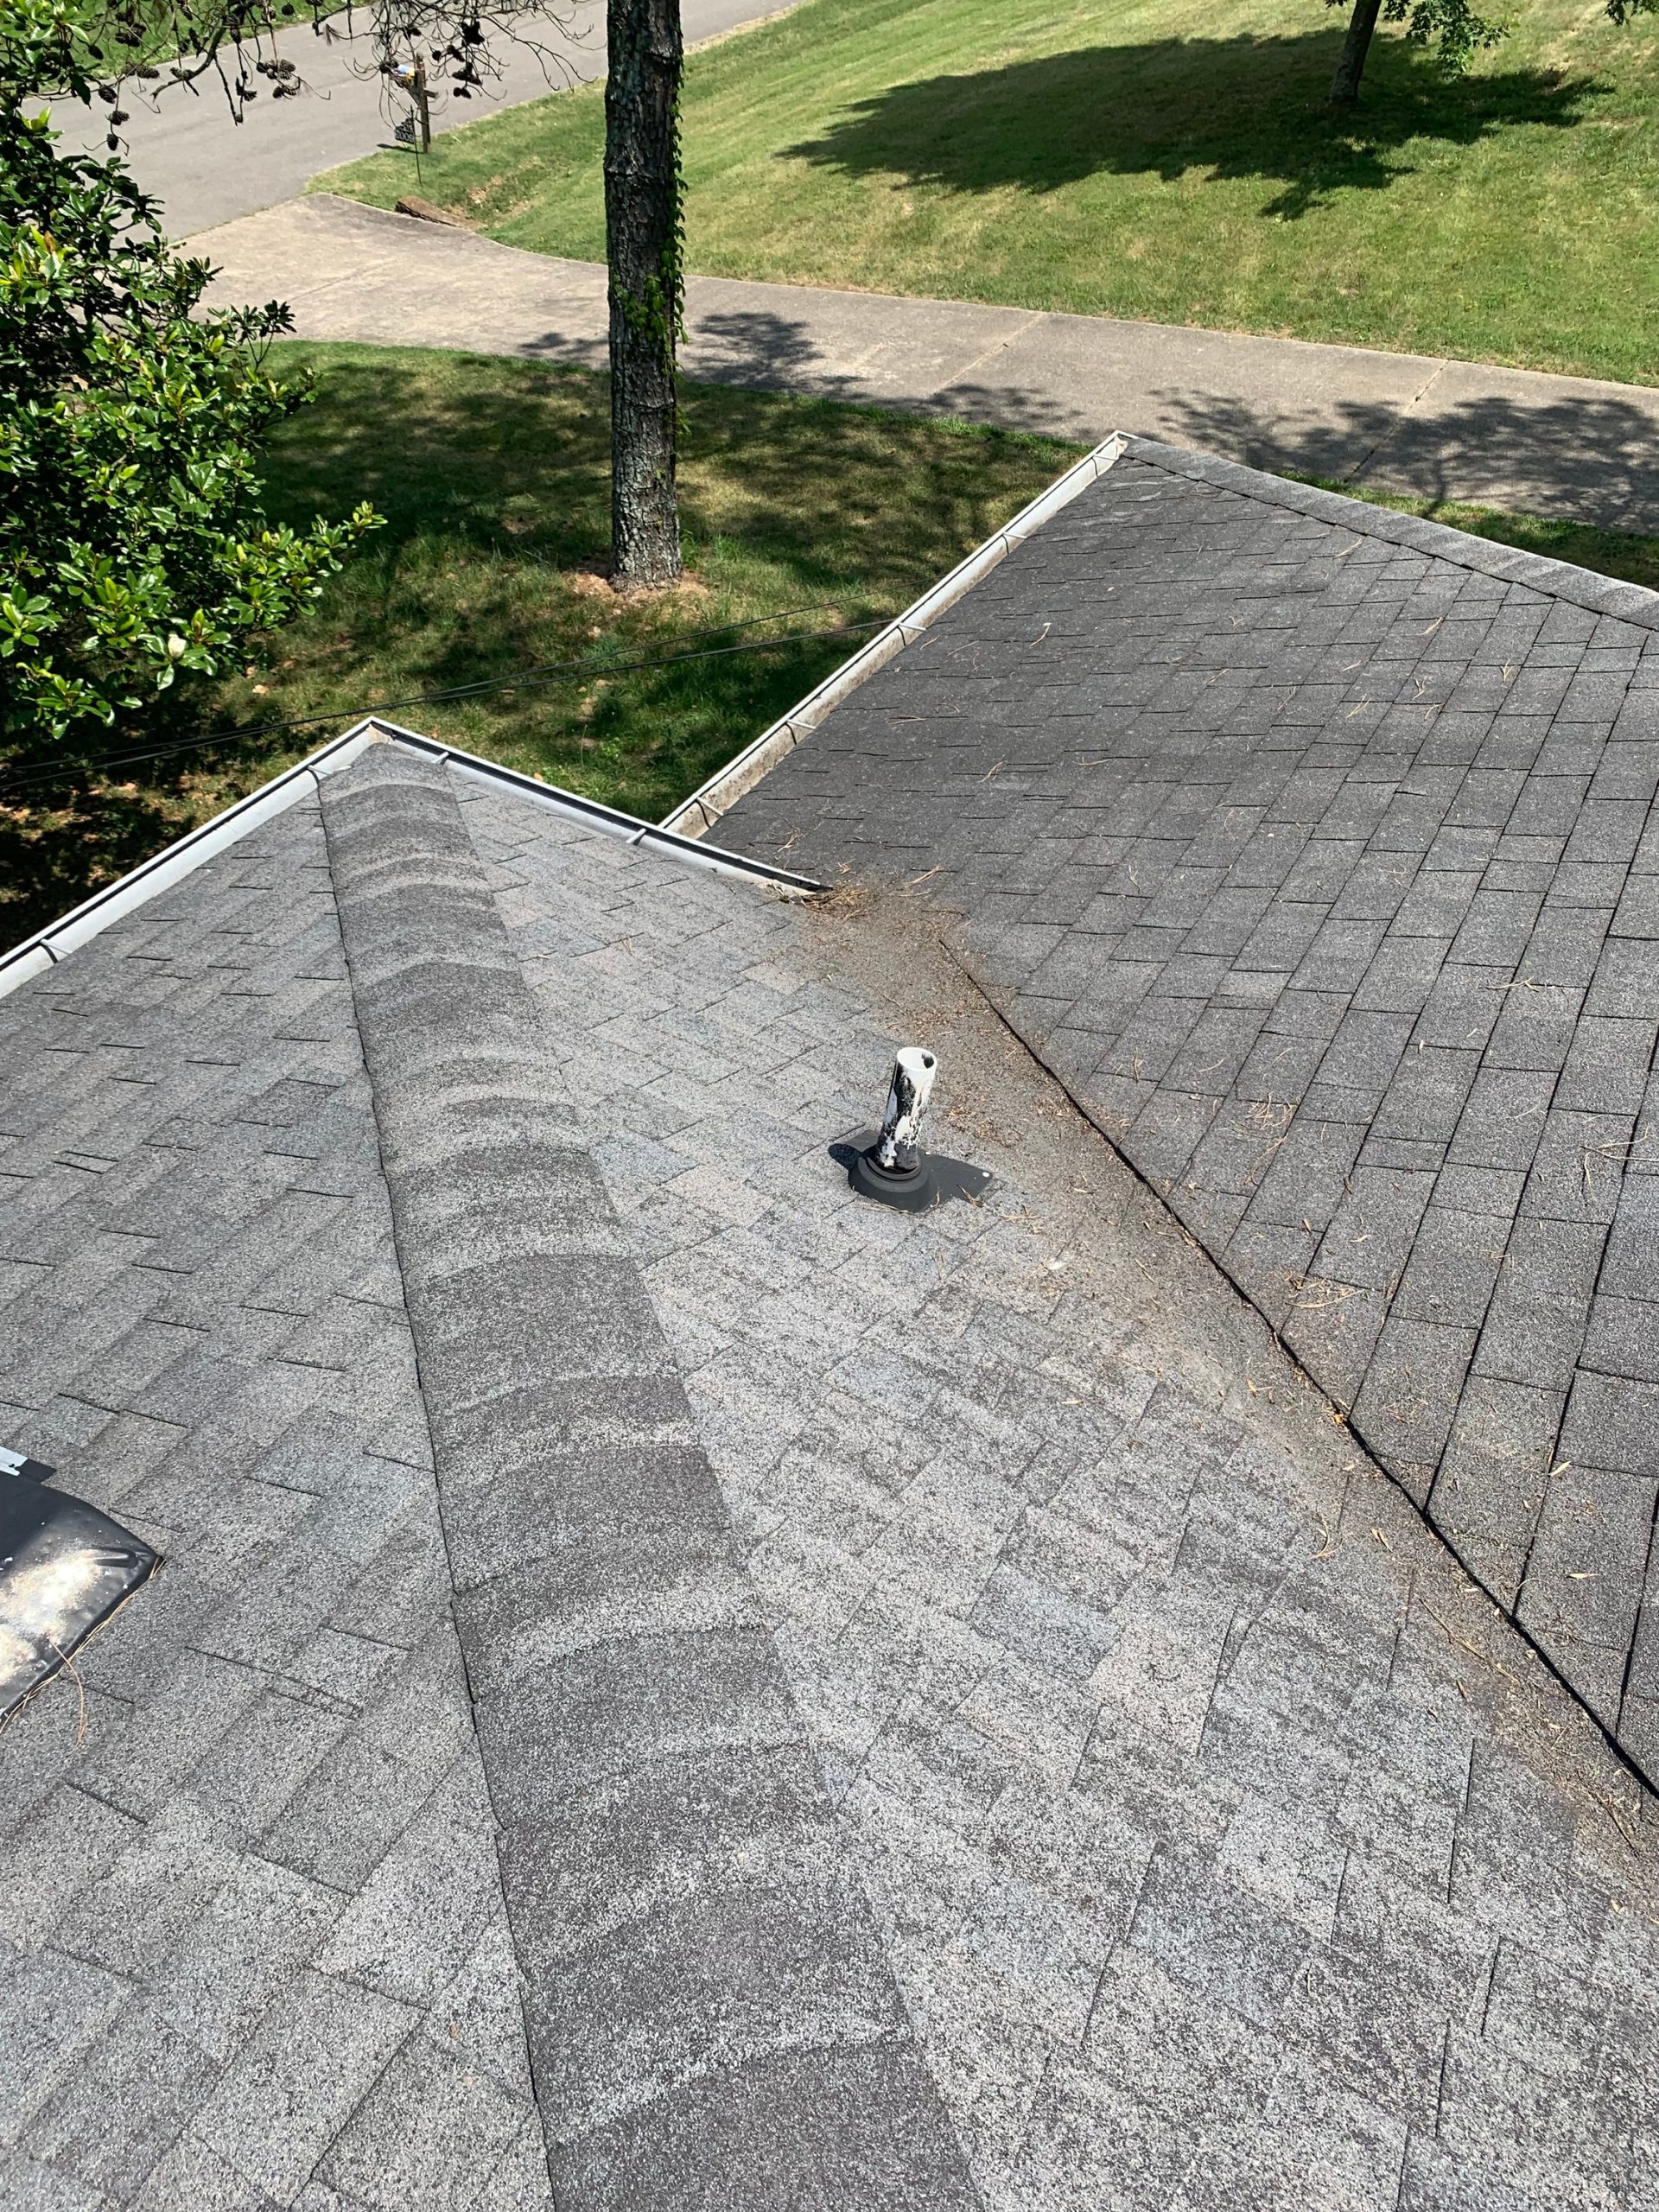 A clean gutter from Johnny in Sarasota